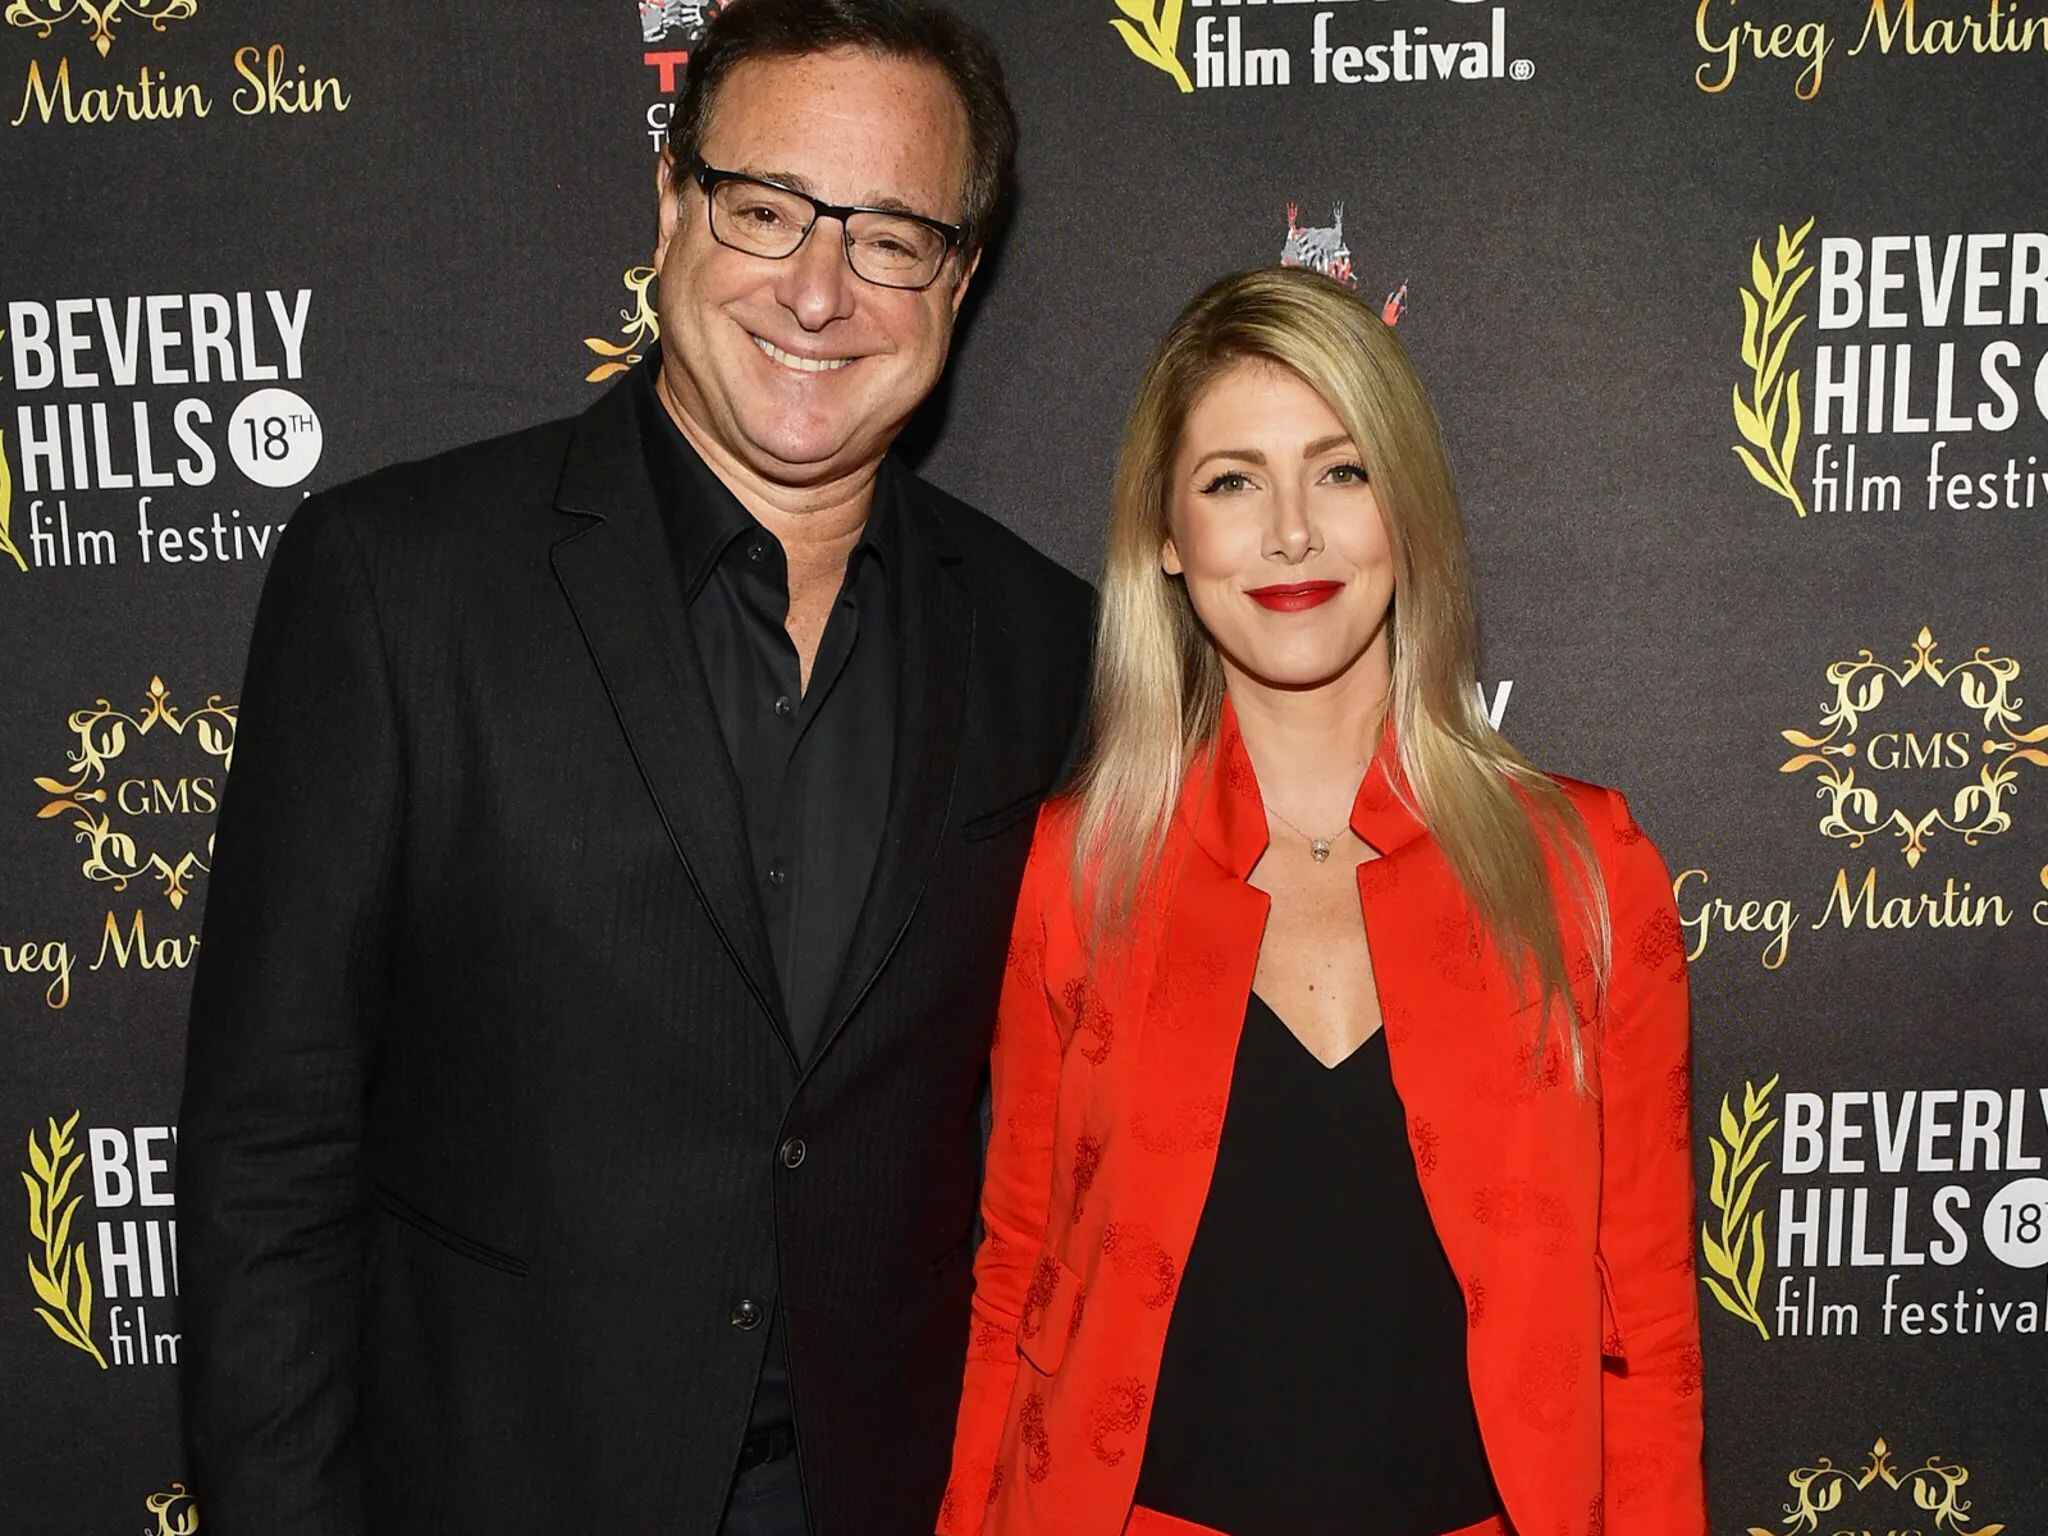 Remembering Bob Saget: Kelly Rizzo’s Emotional Tribute On Second Anniversary Of His Passing